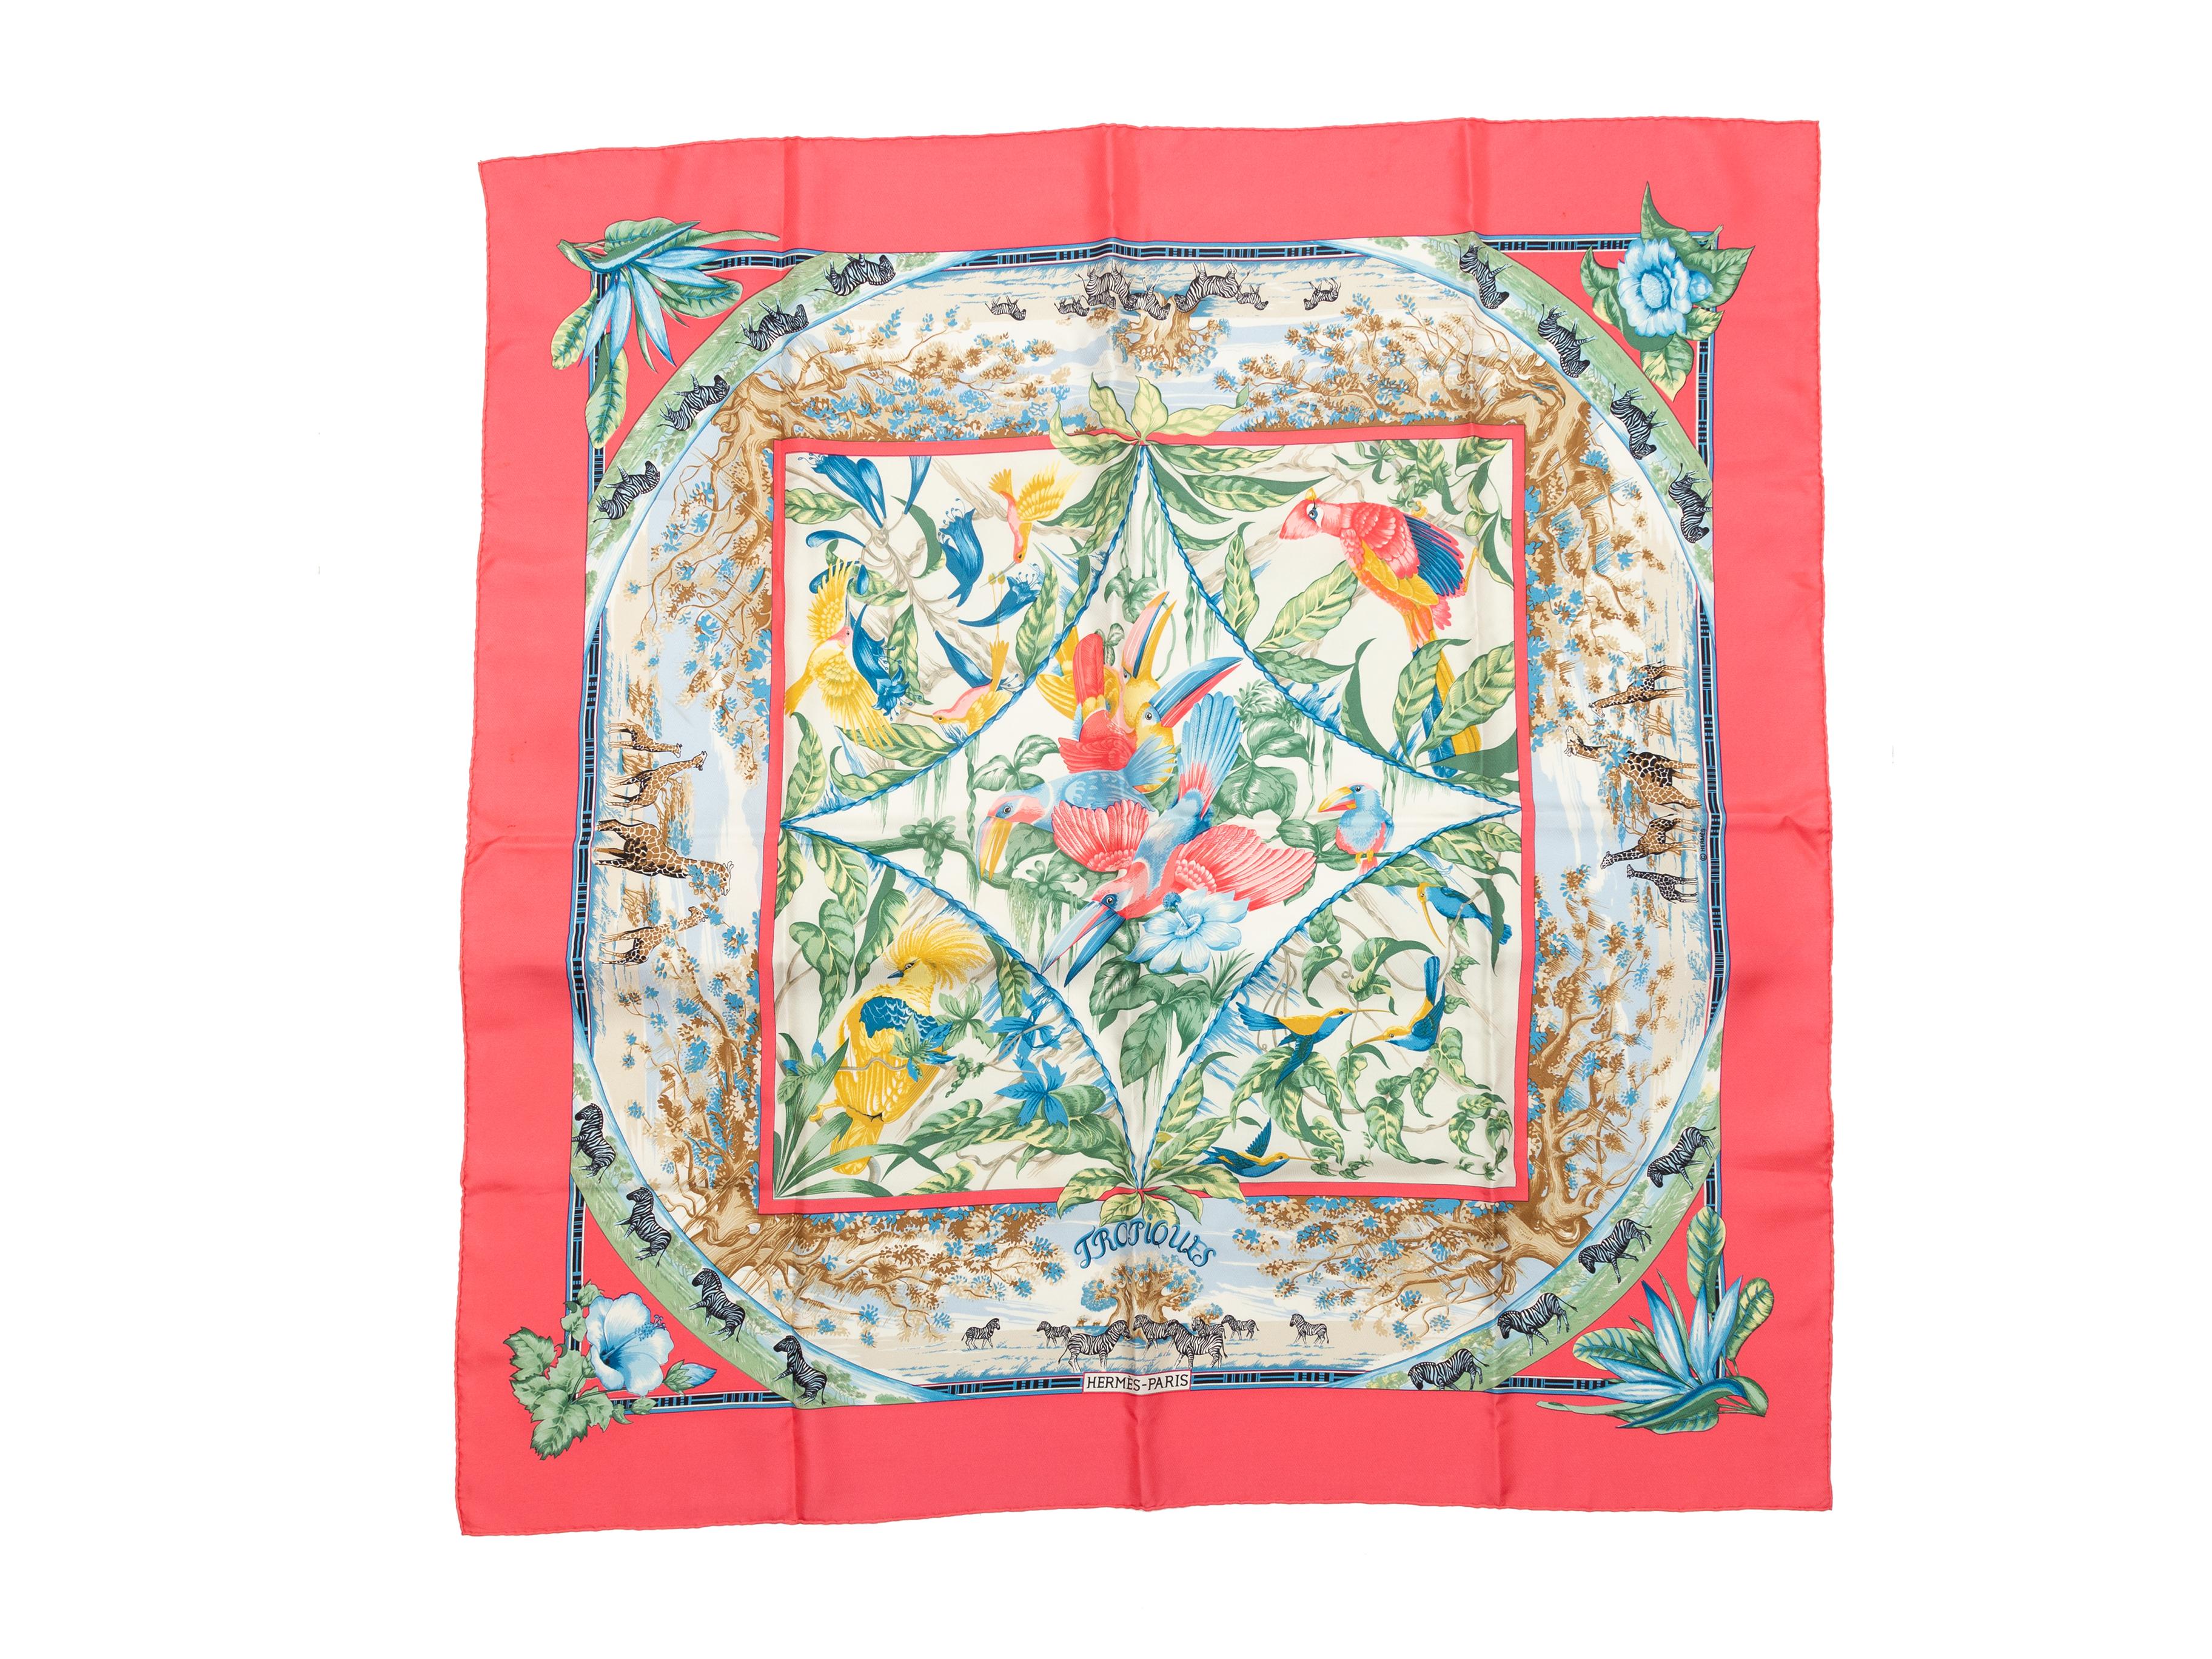 Product details: Pink and multicolor Tropiques silk scarf by Hermes. 35.5